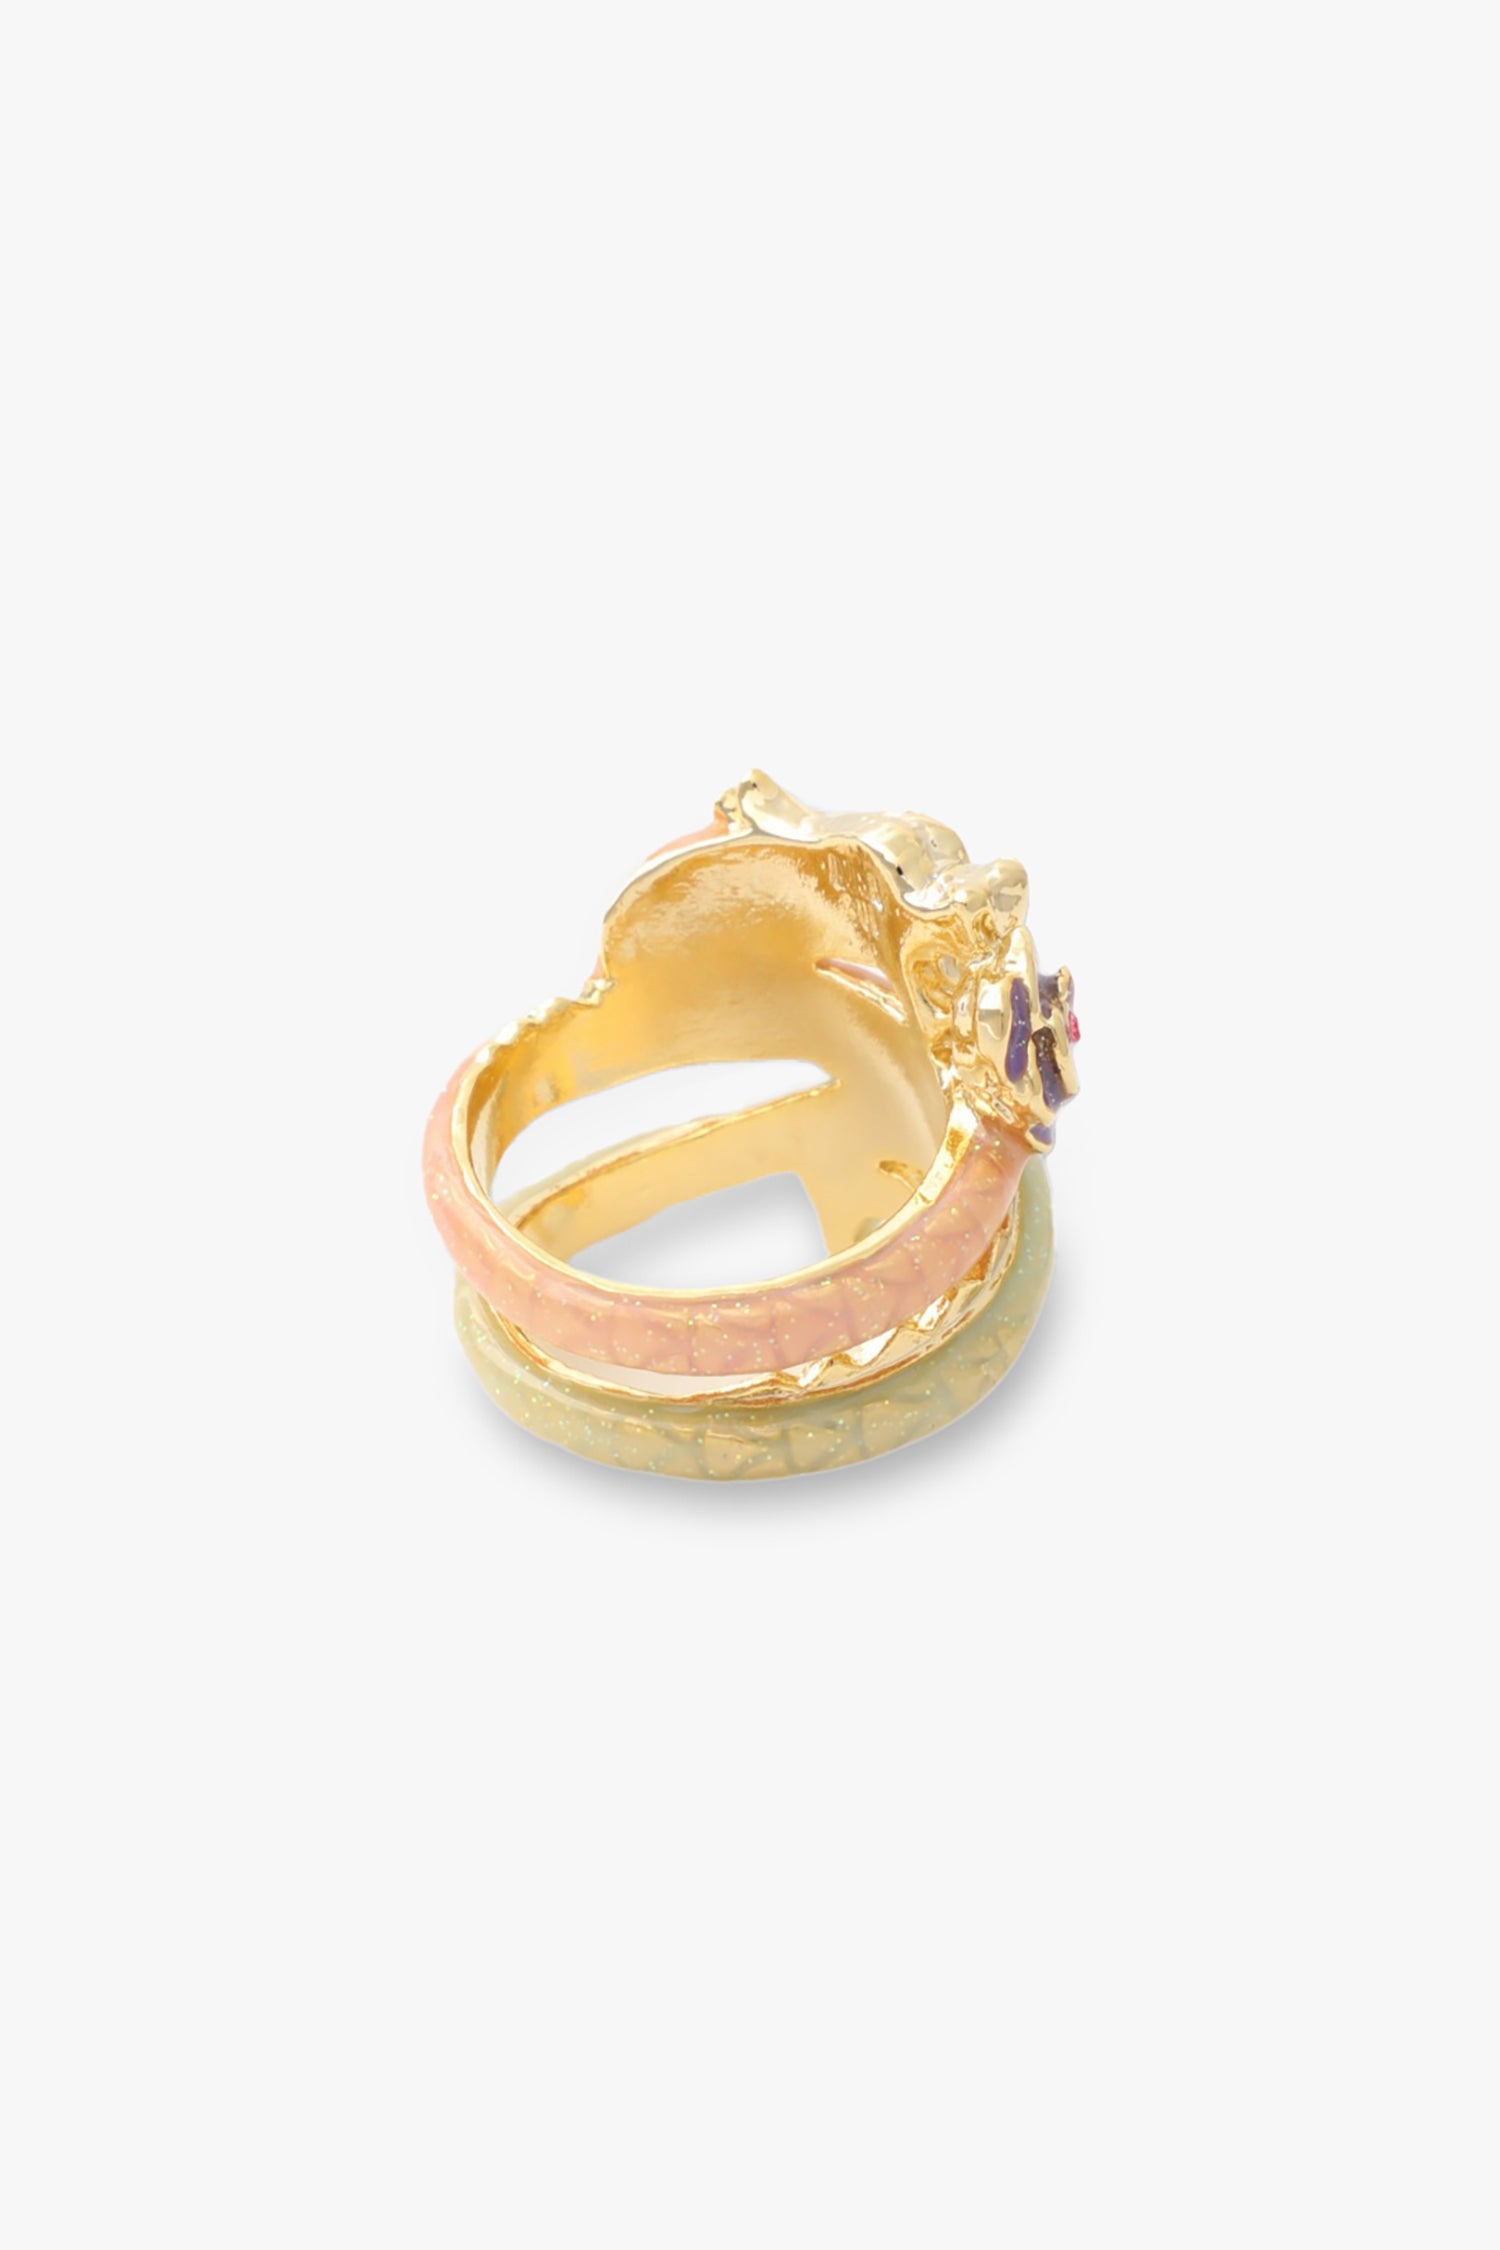 Inside detail of the Powerful dragon ring is gold metal